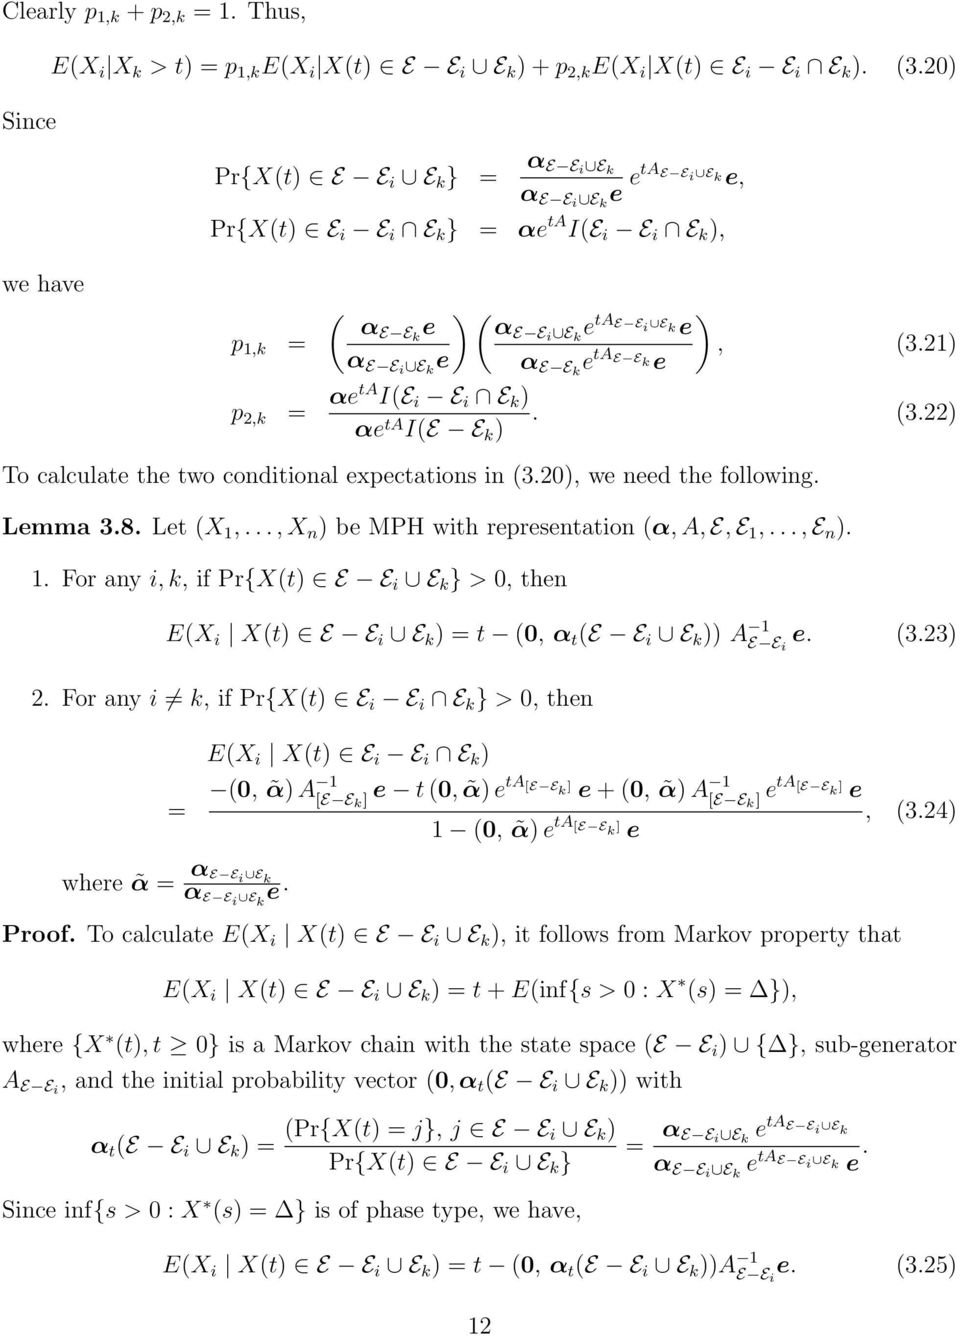 (3.21) p 2,k = αeta I(E i E i E k ). (3.22) αe ta I(E E k ) To calculate the two conditional expectations in (3.20), we need the following. Lemma 3.8. Let (X 1,.